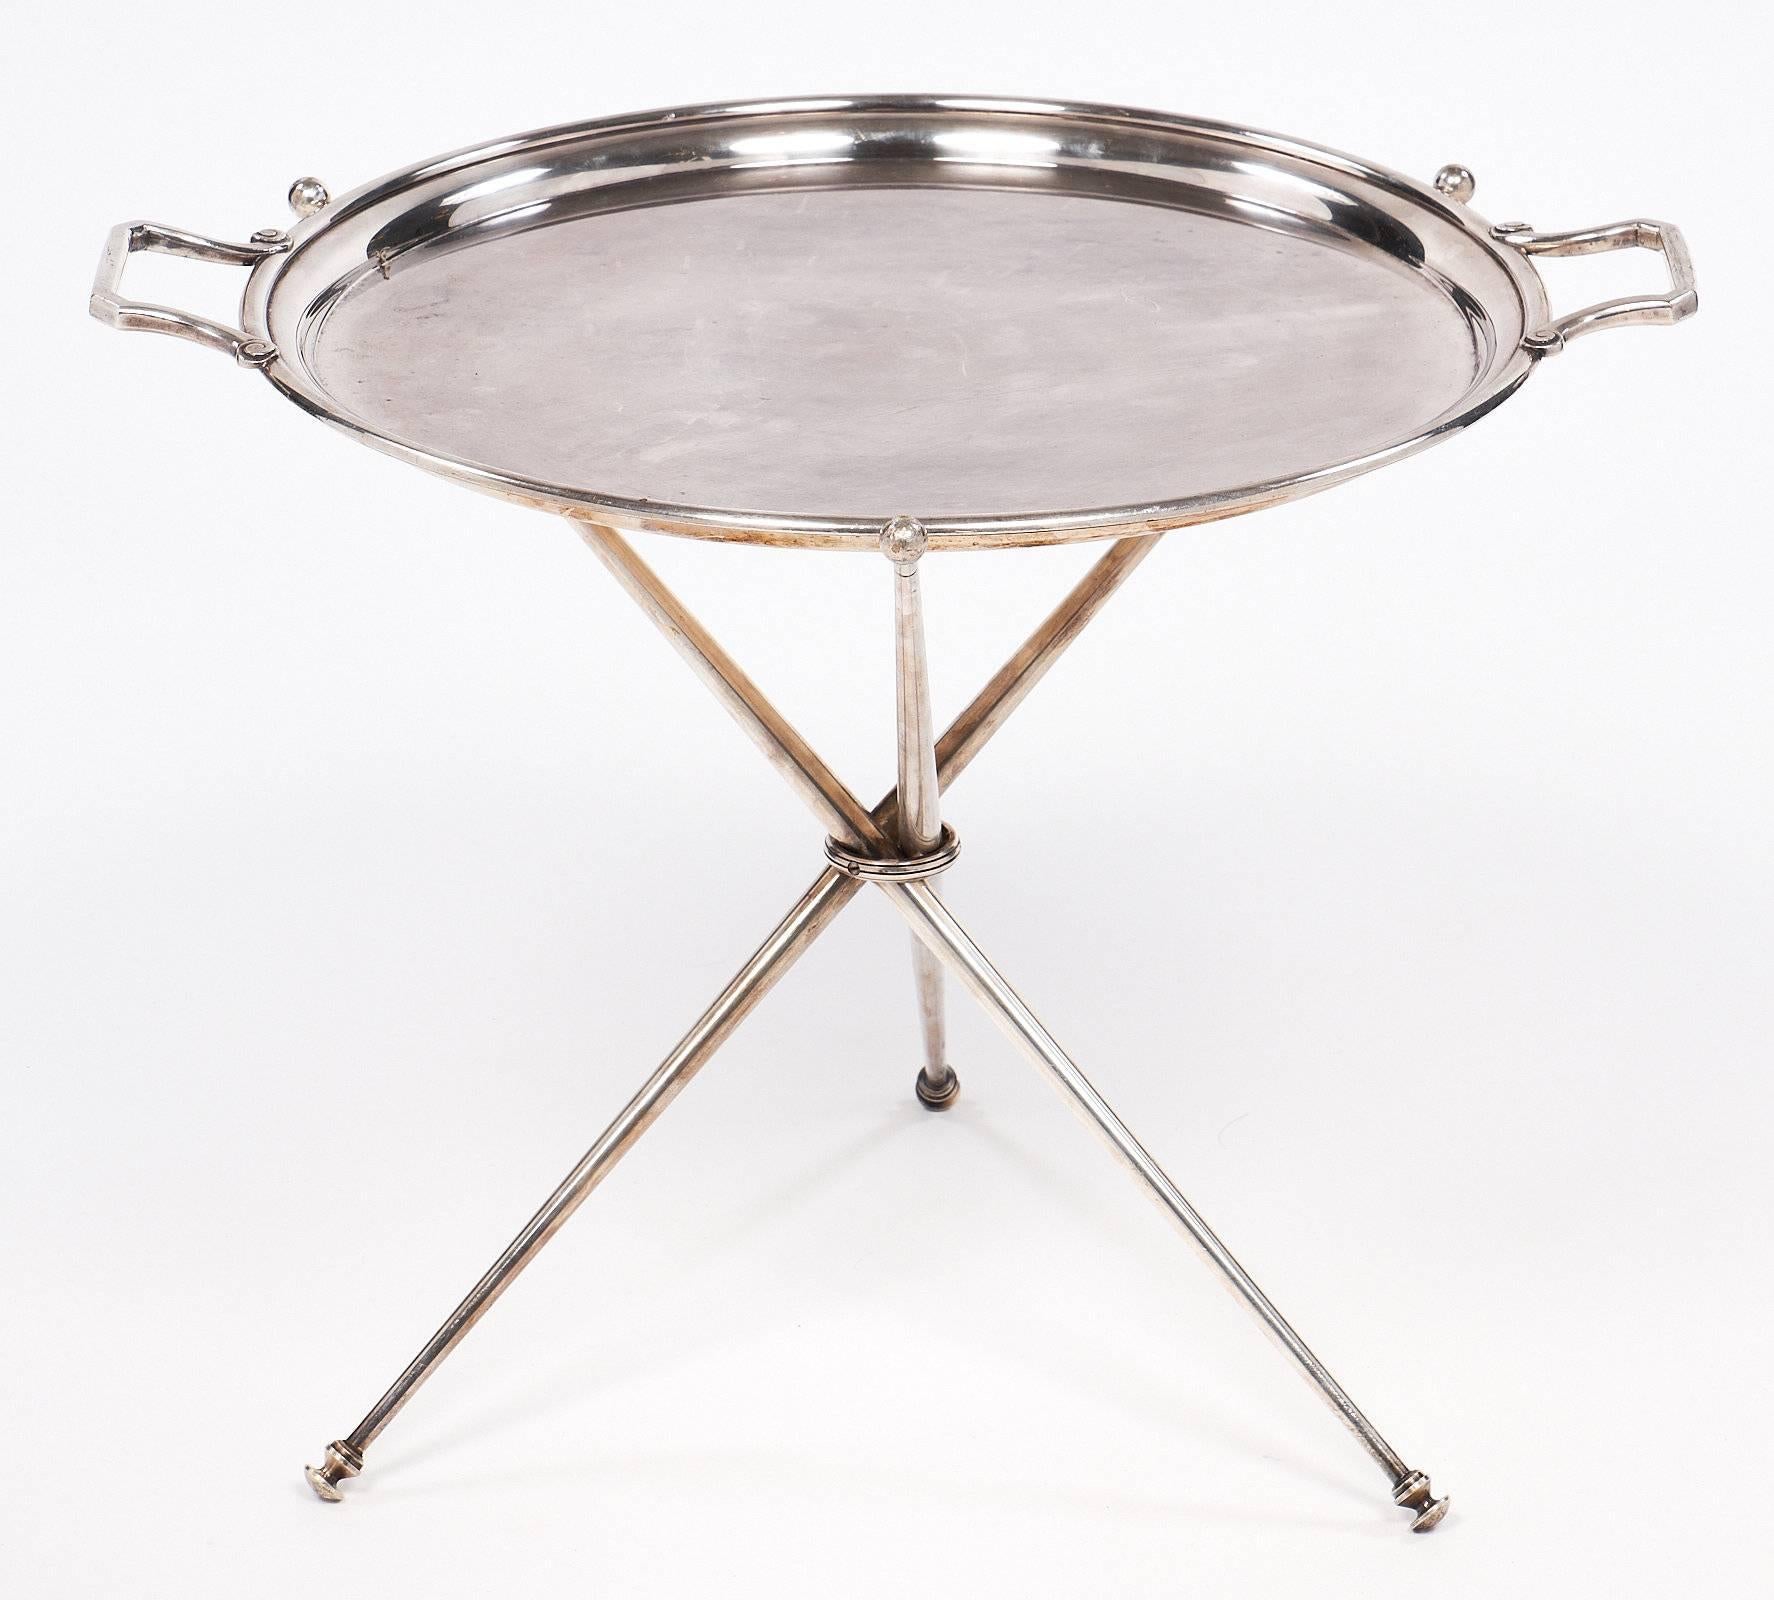 Art Deco period charming silver plated tripod tray table from France. We love the sophisticated feel and the Classic lines of this perfect cocktail hour accessory.
  